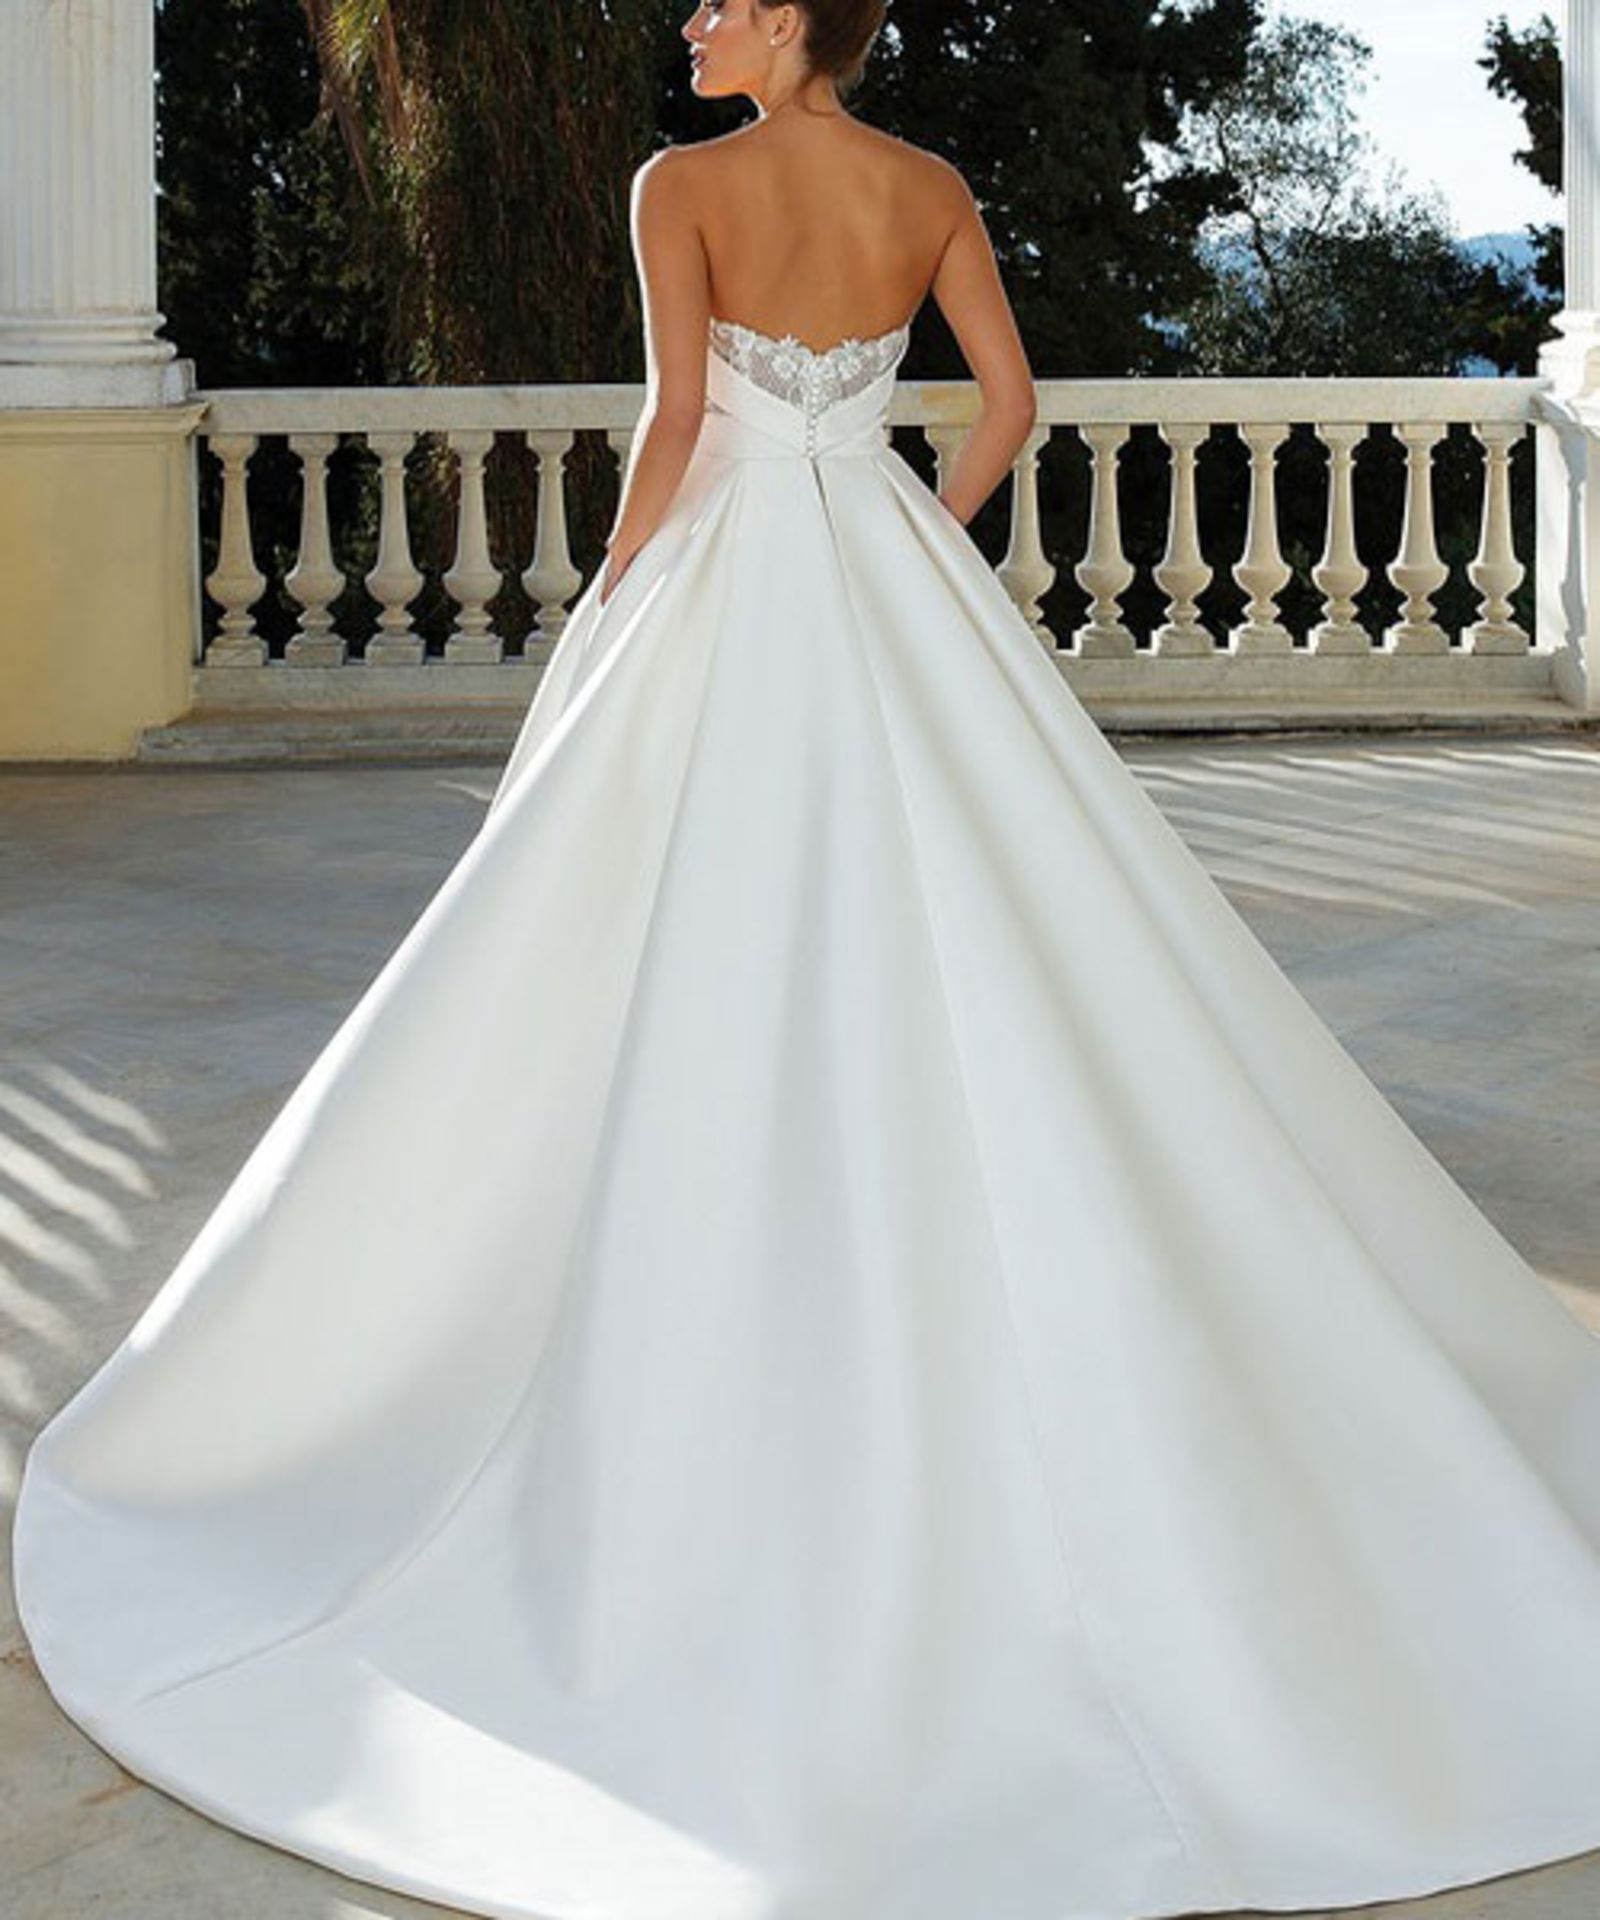 1 x Justin Alexander Mikado Bridal Ball Gown With Sweetheart Neckline - UK Size 12 - RRP £1,338 - Image 7 of 11